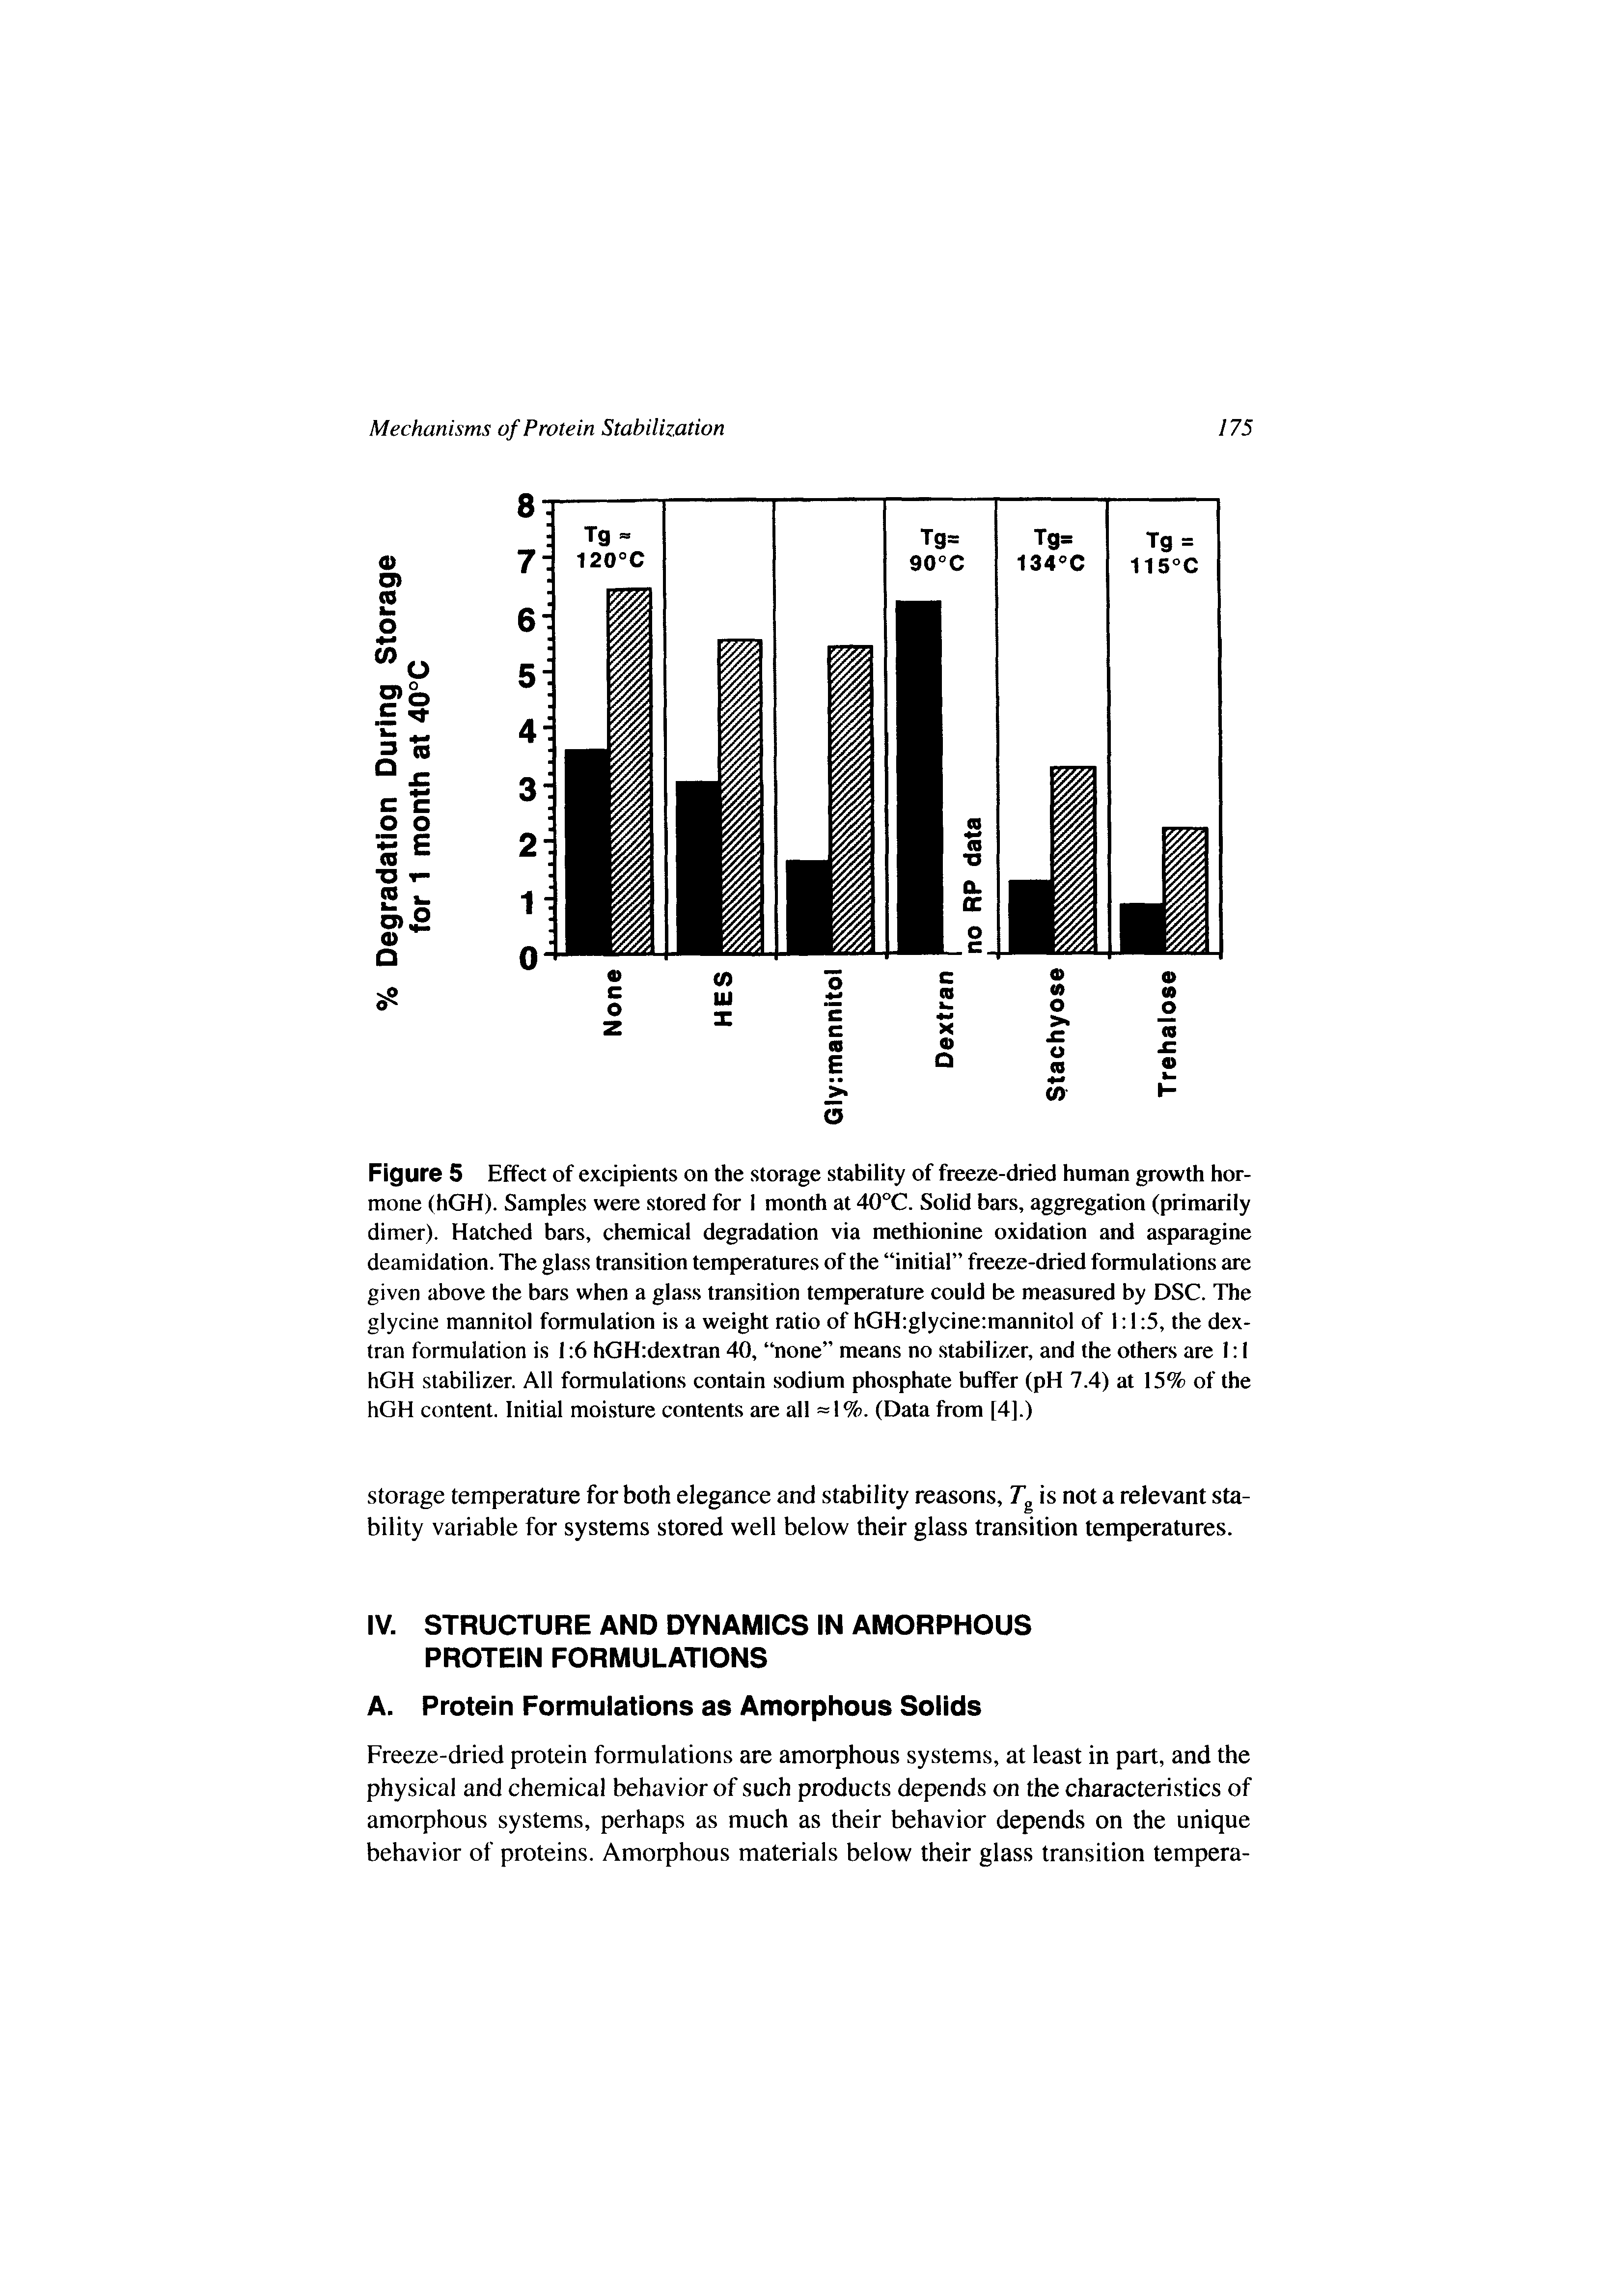 Figure 5 Effect of excipients on the storage stability of freeze-dried human growth hormone (hGH). Samples were stored for I month at 40°C. Solid bars, aggregation (primarily dimer). Hatched bars, chemical degradation via methionine oxidation and asparagine deamidation. The glass transition temperatures of the initial freeze-dried formulations are given above the bars when a gla.ss transition temperature could be measured by DSC. The glycine mannitol formulation is a weight ratio of hGH glycine mannitol of 1 1 5, the dex-tran formulation is 1 6 hGH dextran 40, none means no stabilizer, and the others are 1 1 hGH stabilizer. All formulations contain sodium phosphate buffer (pH 7.4) at 15% of the hGH content. Initial moisture contents are all ==1%. (Data from [4].)...